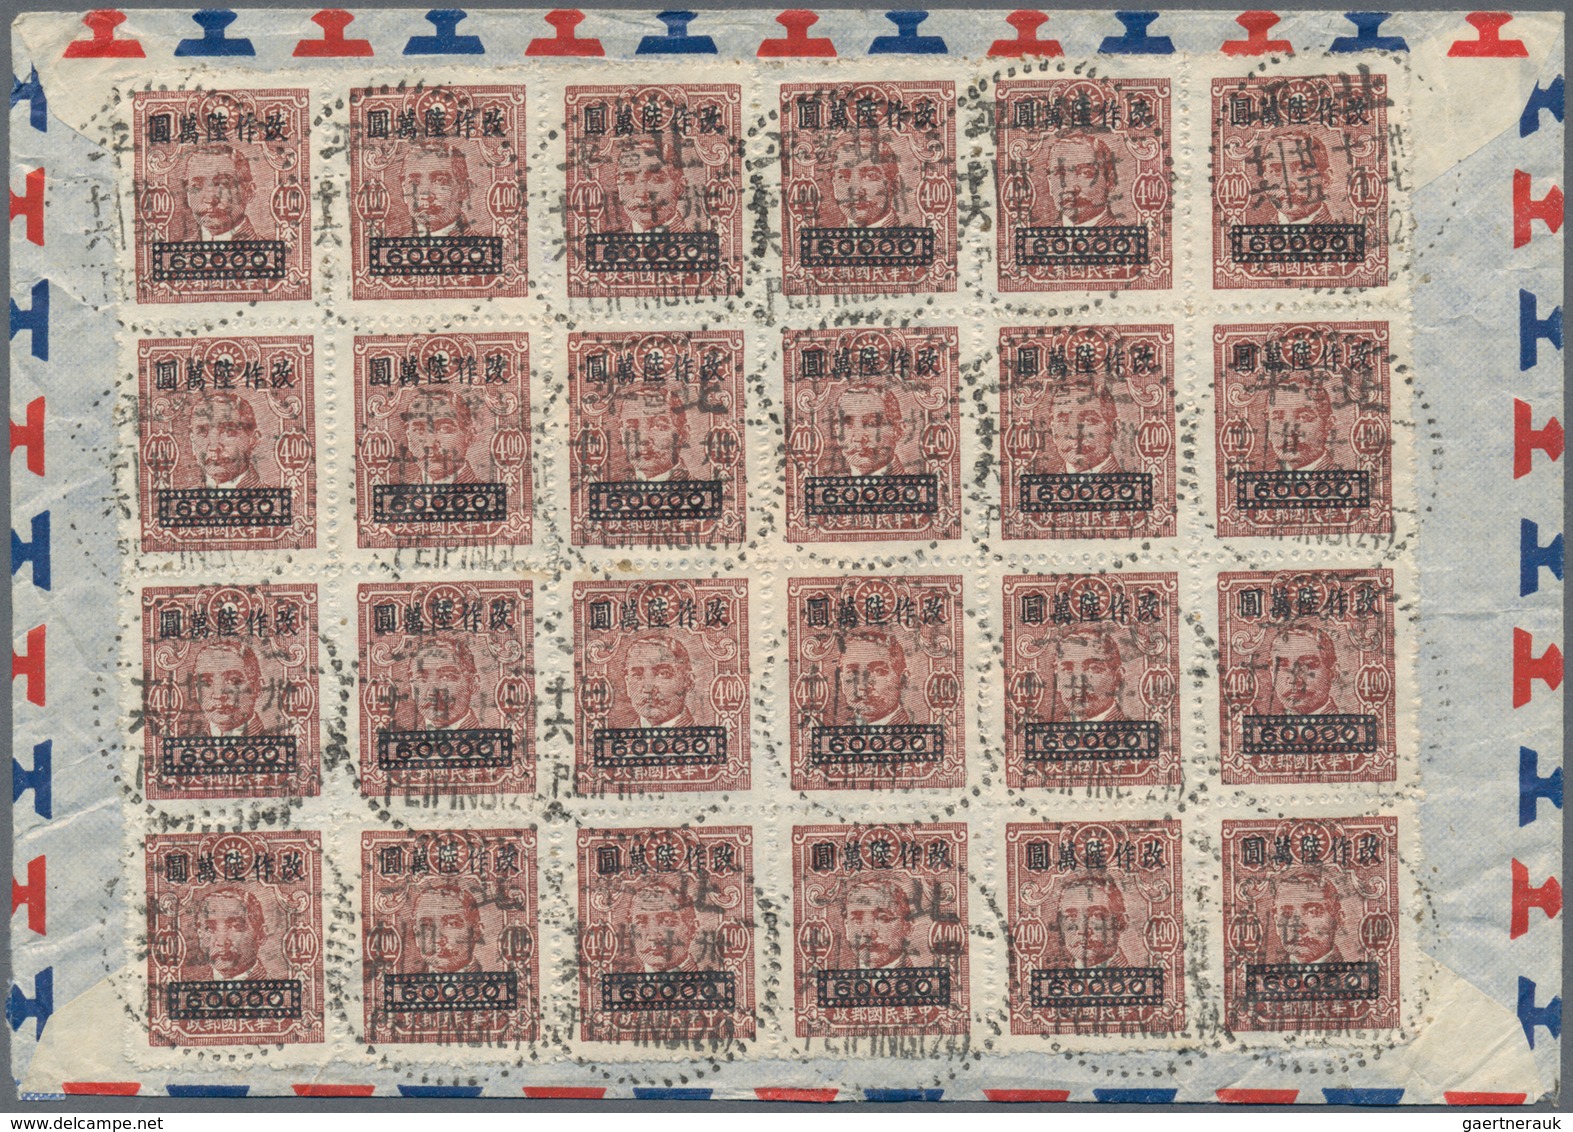 China: 1947/48, air mail covers (4) to Switzerland (3) or USA, including 1947 postal service set (5,